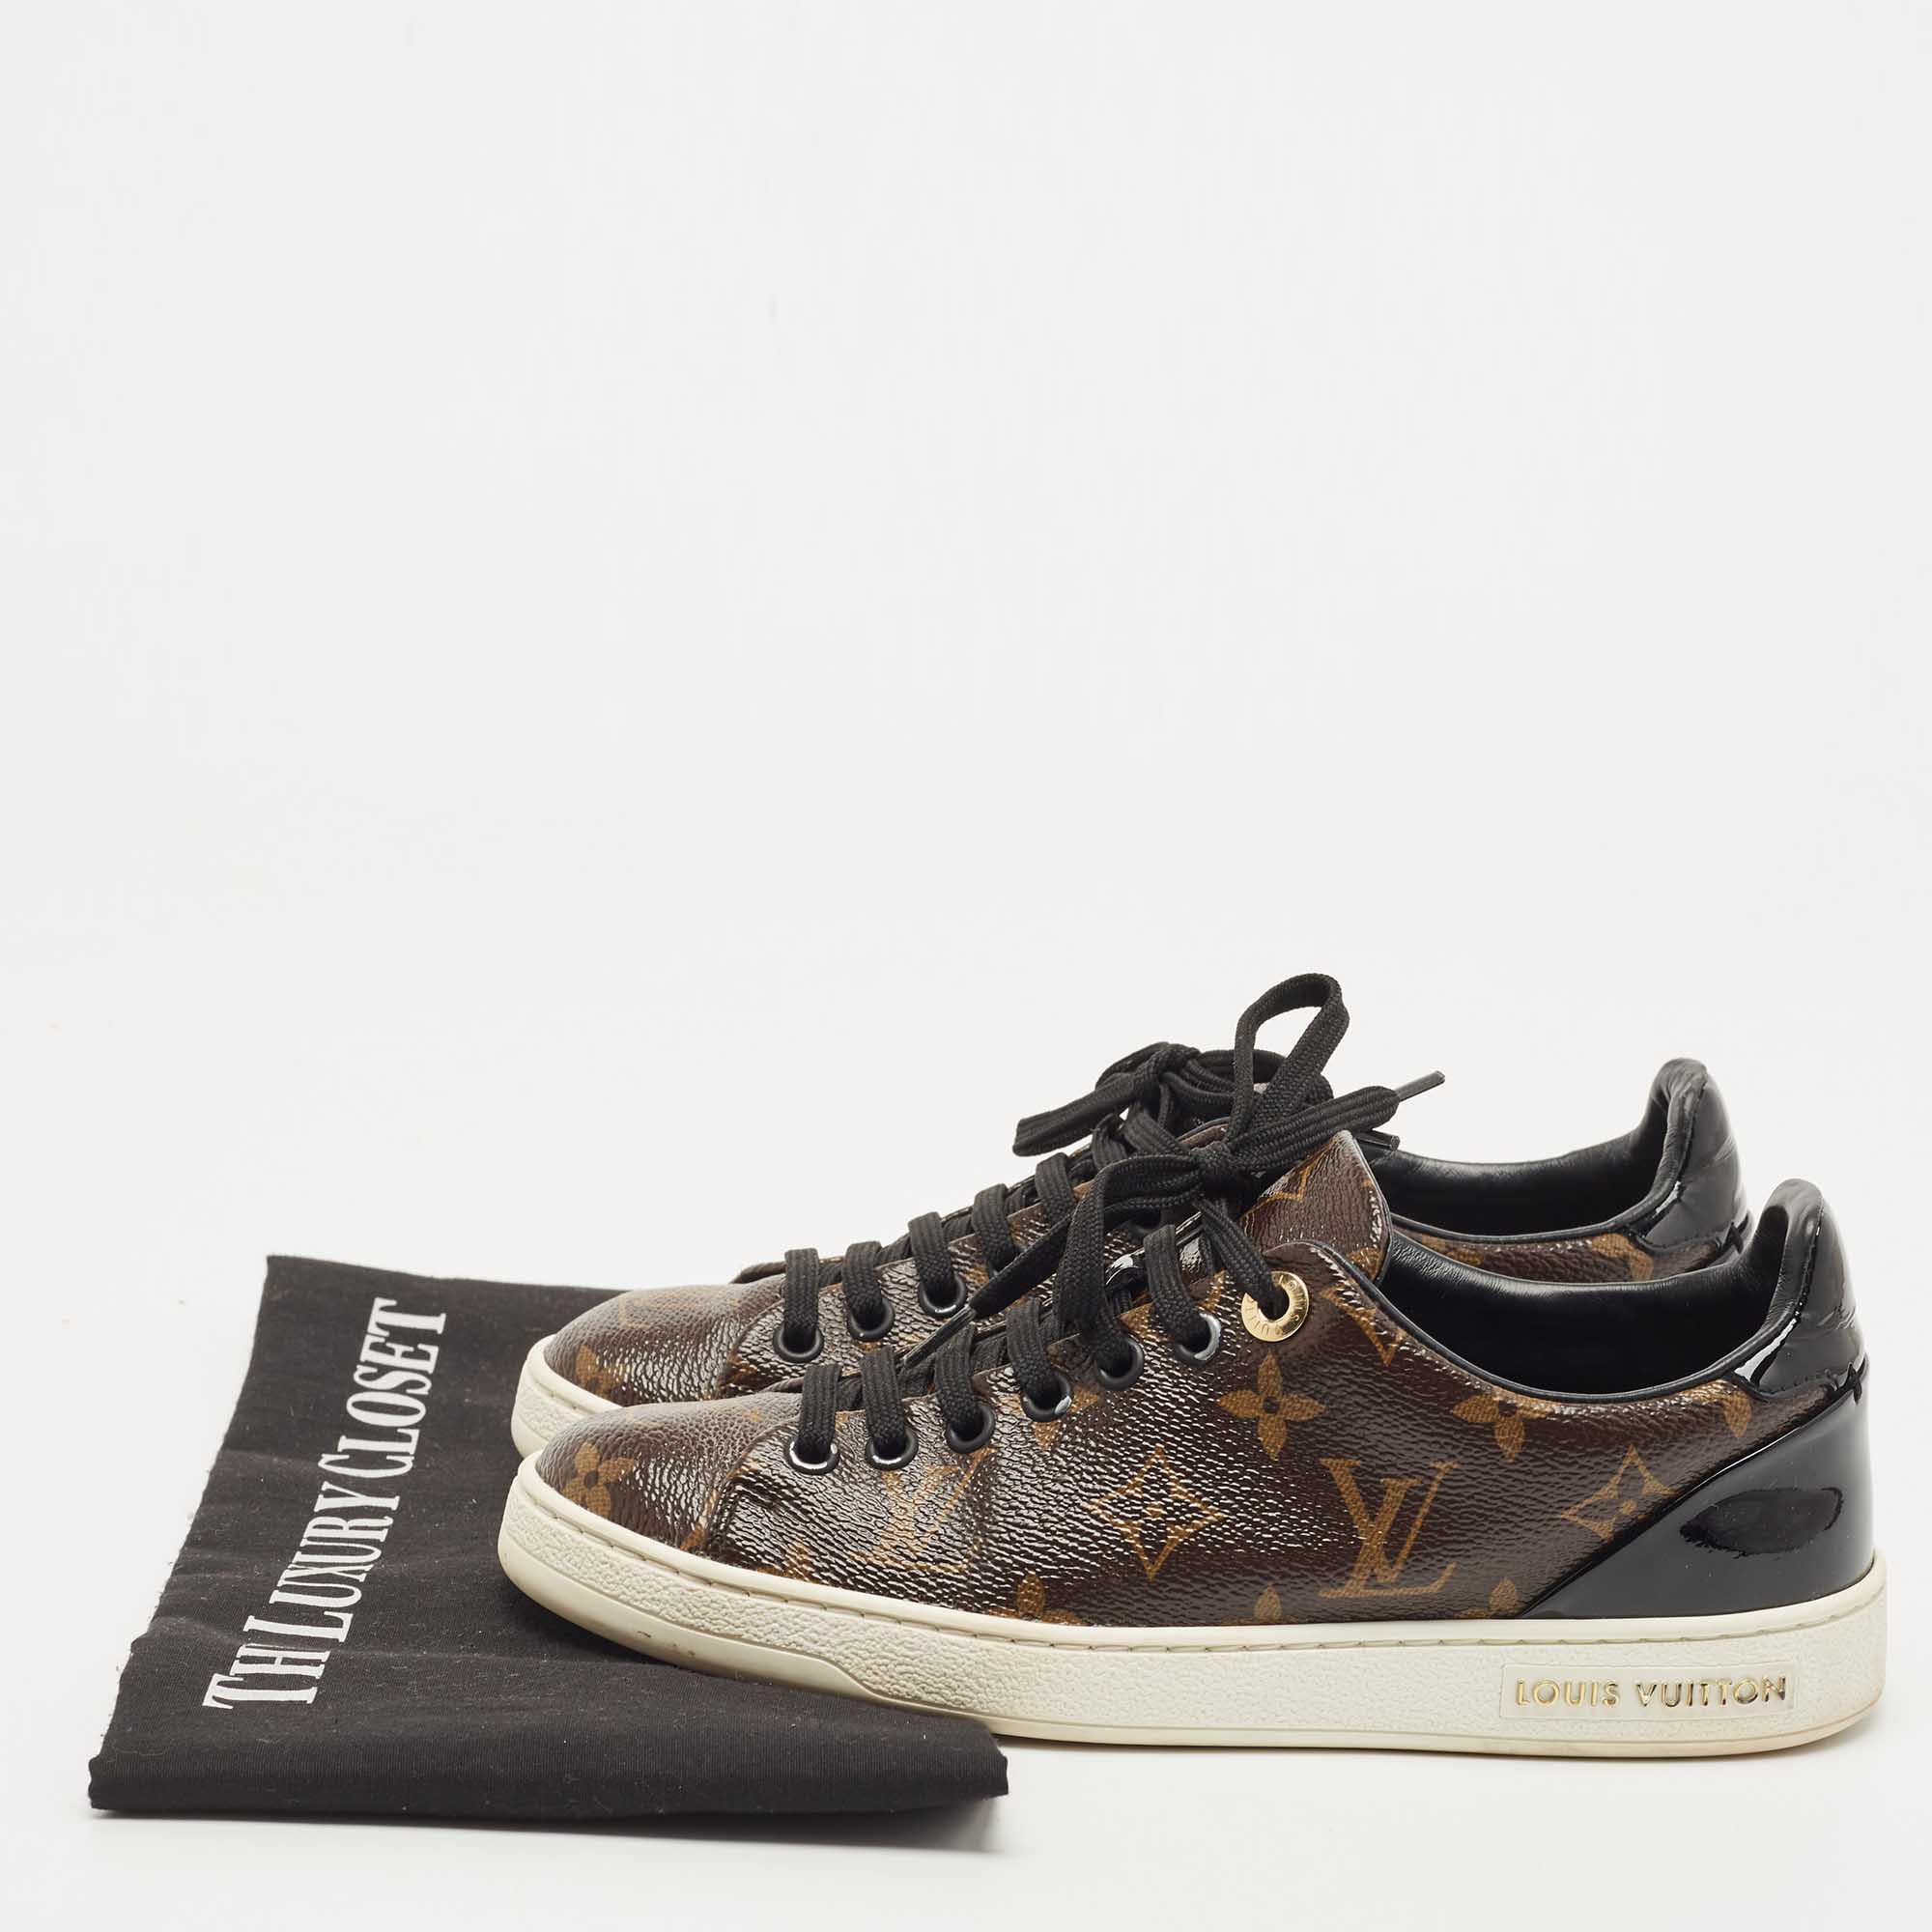 Louis Vuitton Brown/Black Monogram Canvas And Patent Leather Frontrow Sneakers Size 35